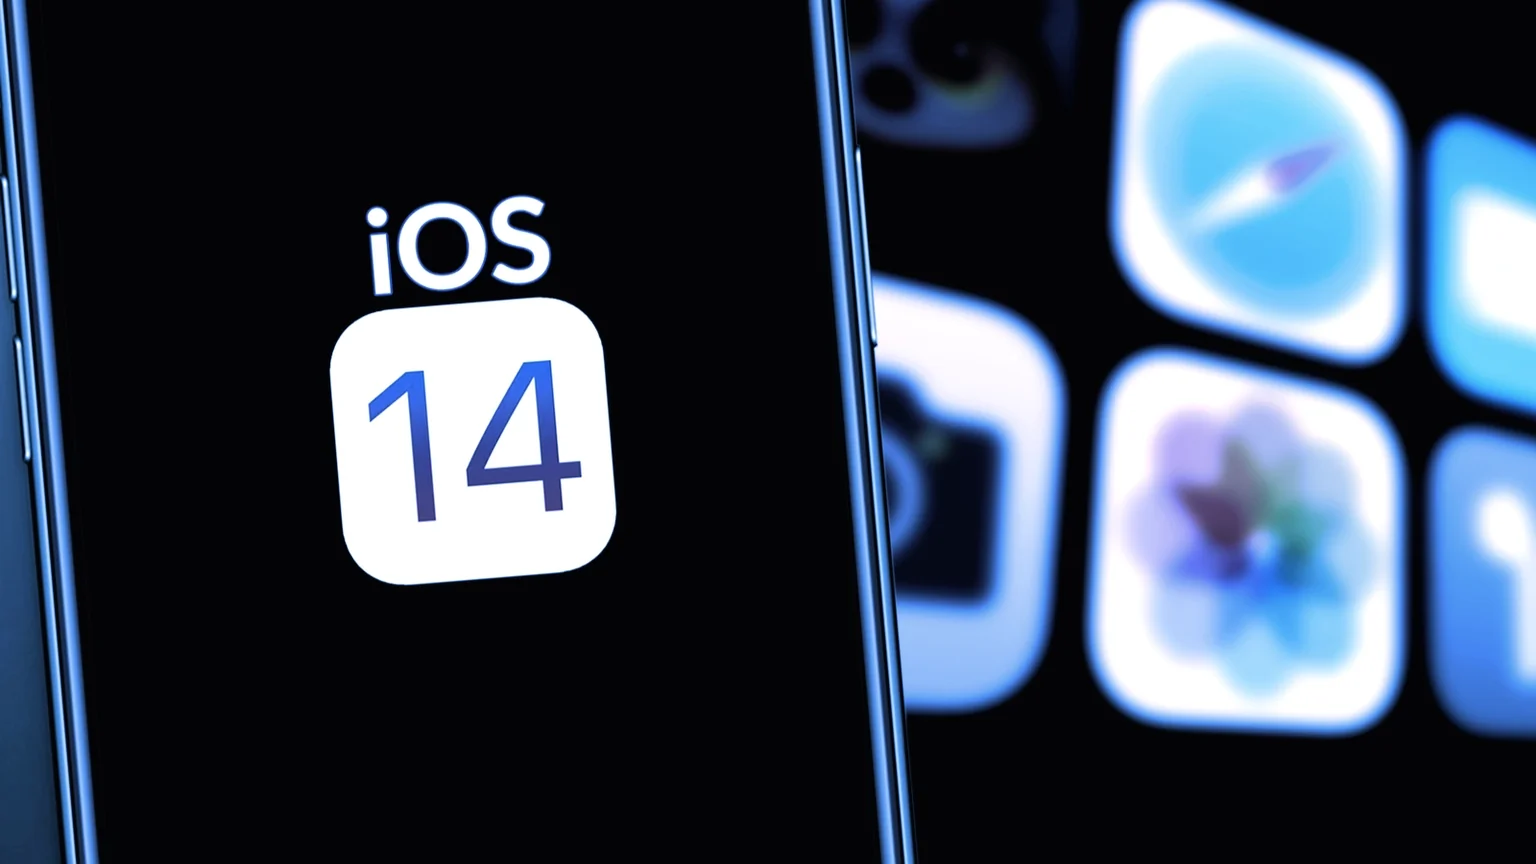 iOS 14 will help users make a conscious choice in regard to their privacy. Image: Shutterstock